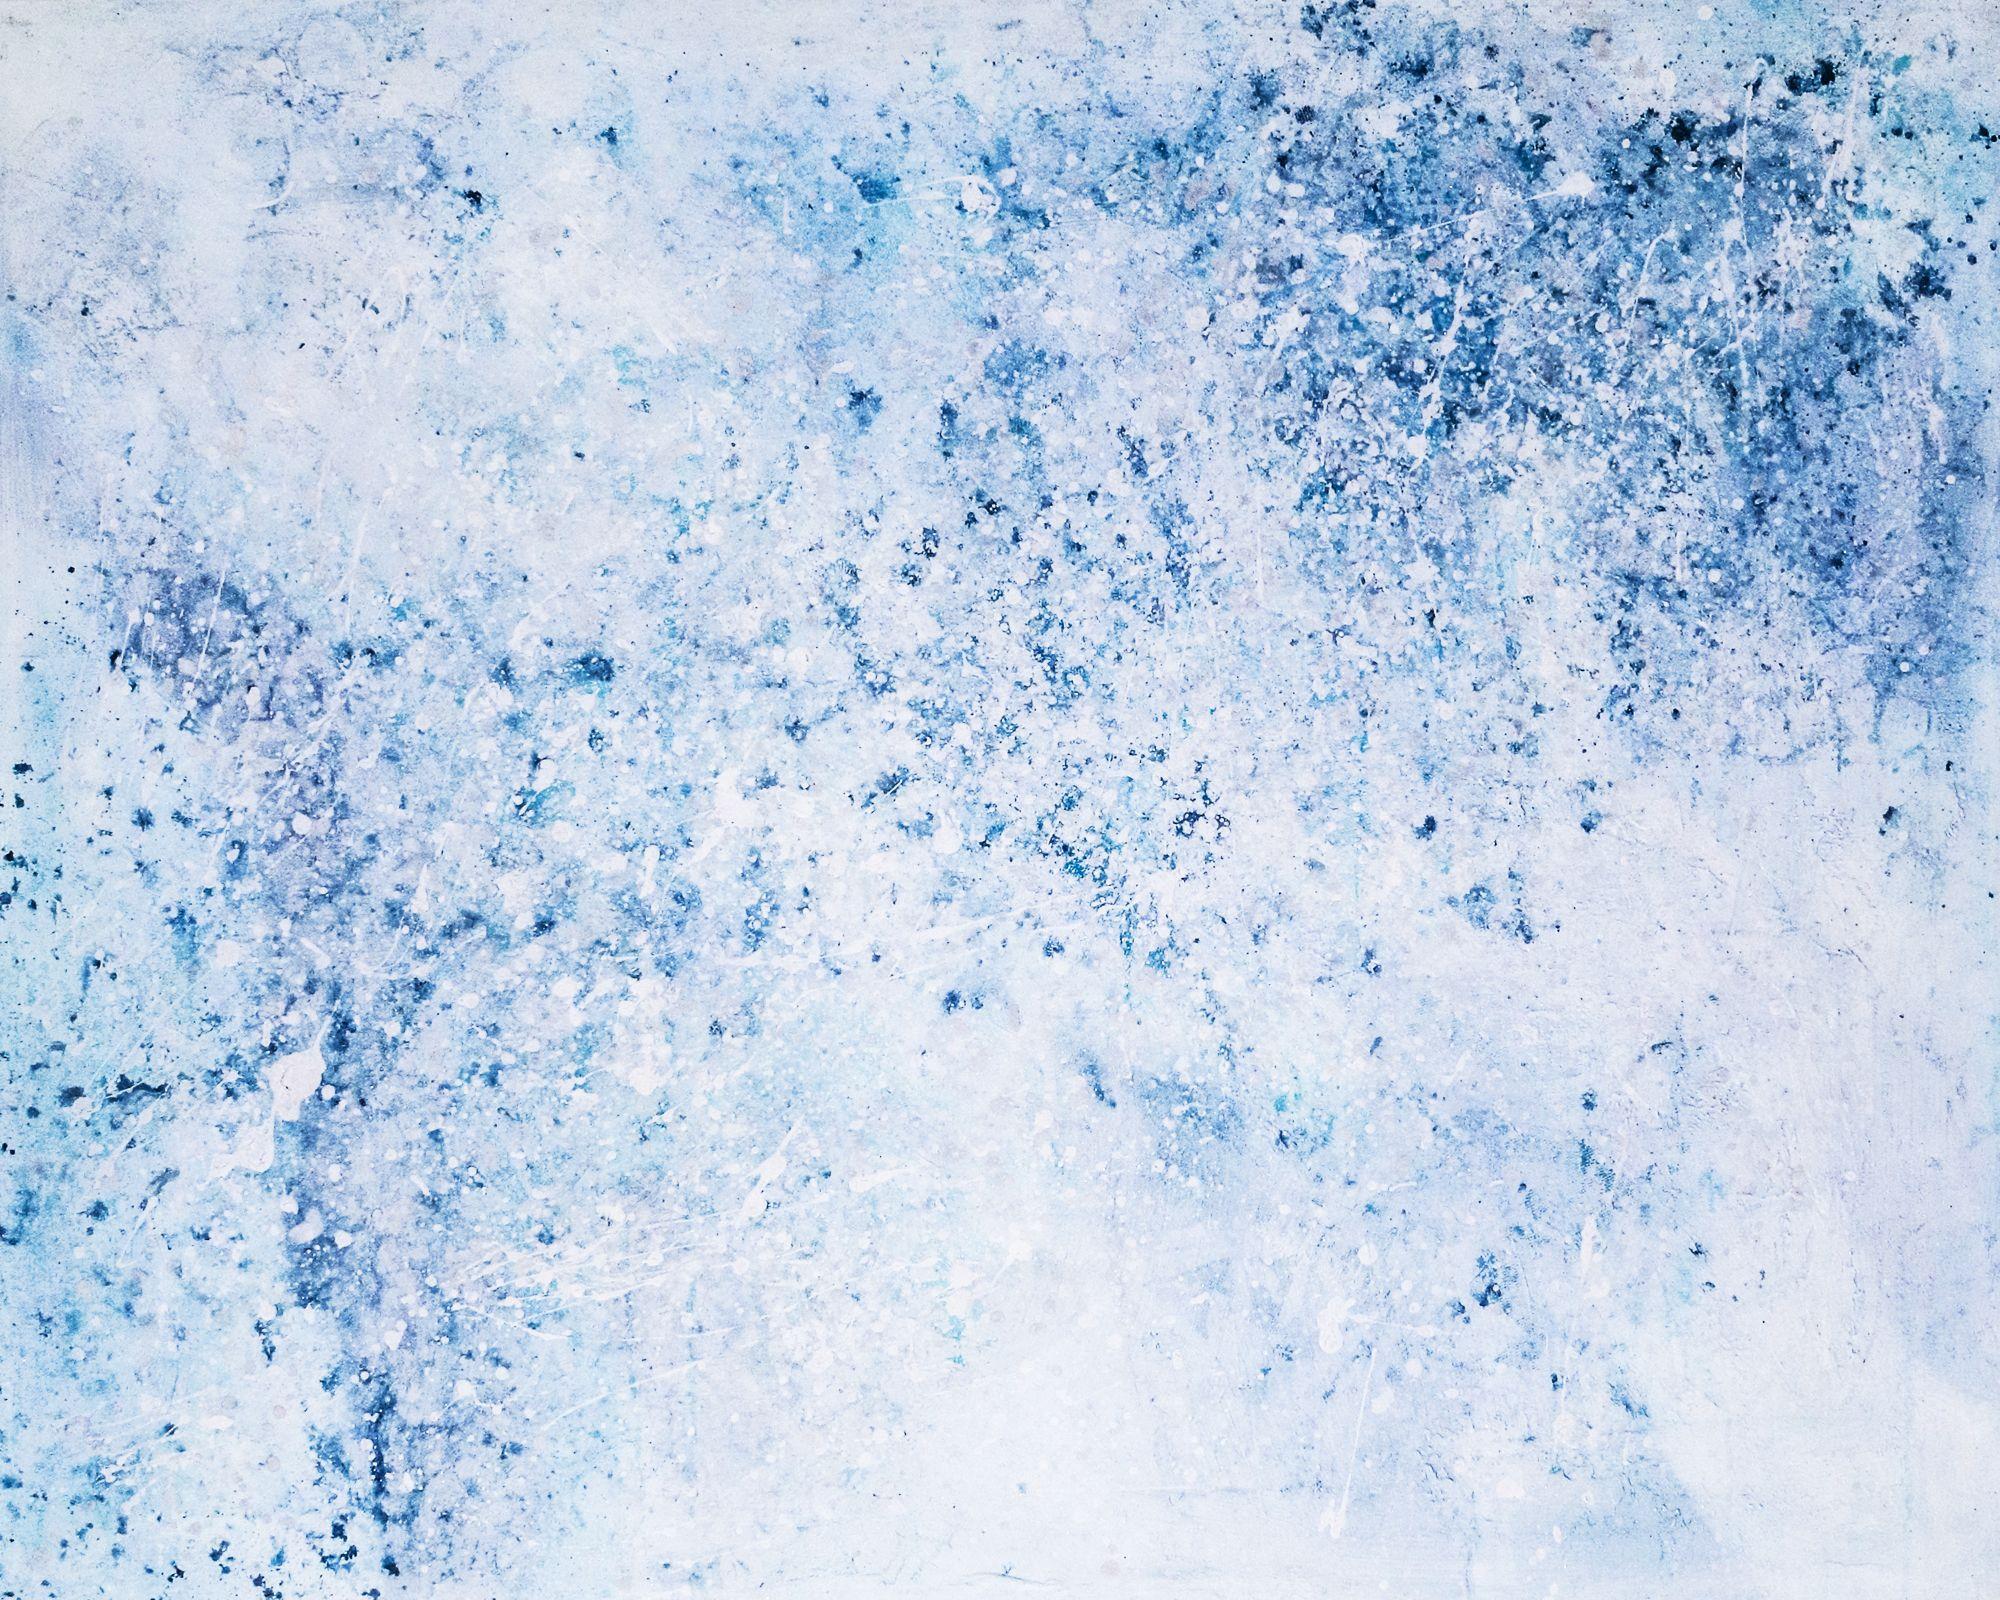 Hyunah Kim Abstract Painting - Milky way, Painting, Acrylic on Canvas